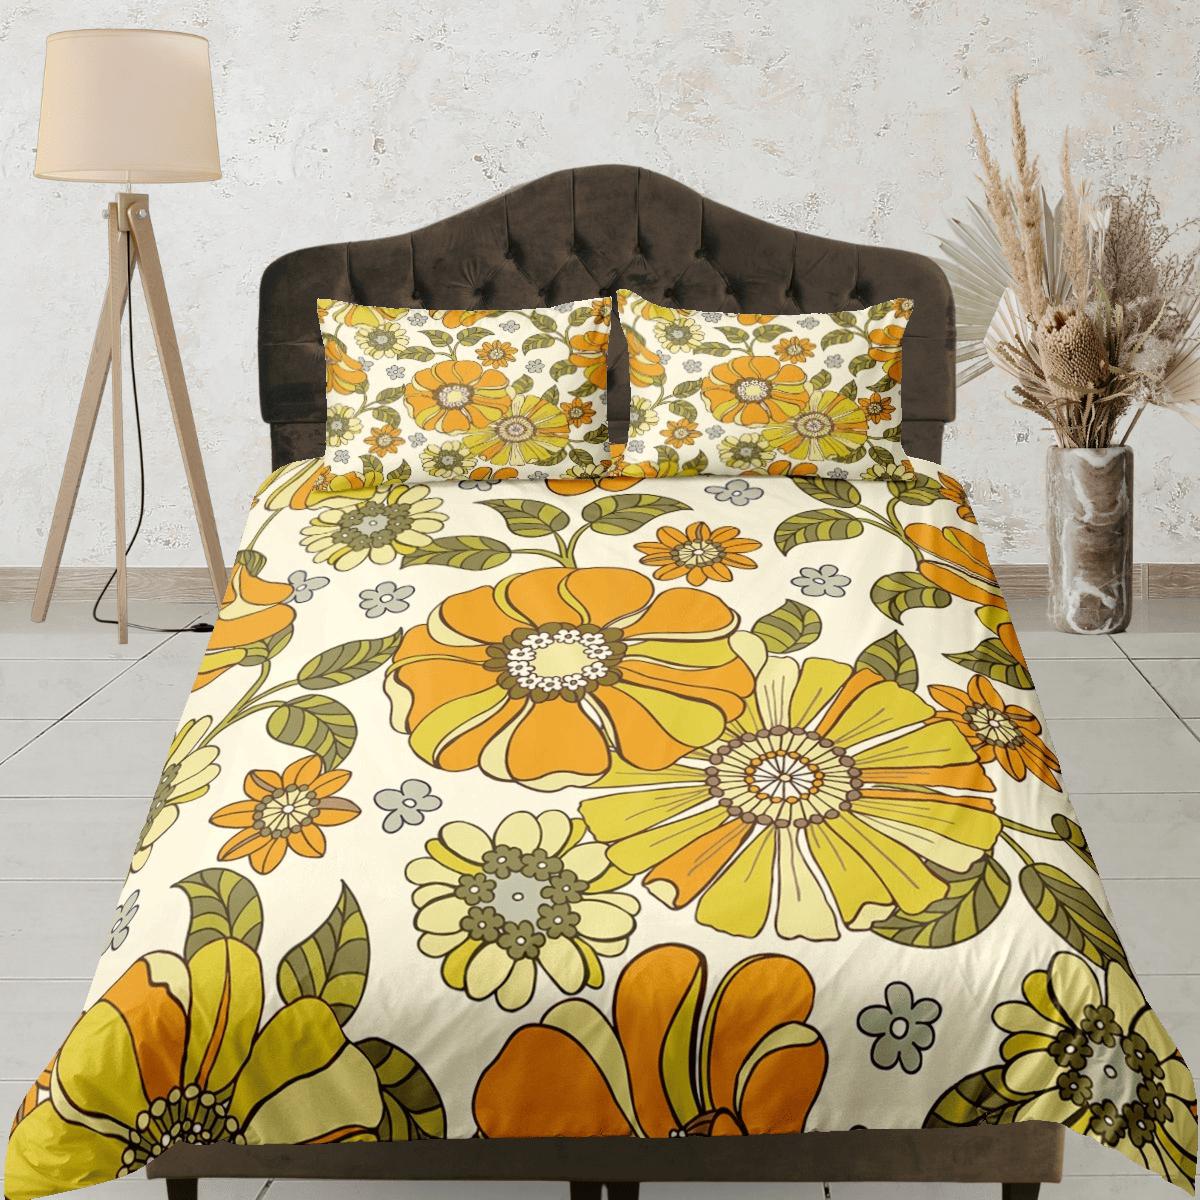 daintyduvet Orange daisies retro bedding mid century modern floral duvet cover colorful bed cover, vintage style boho chic bedspread aesthetic bedding